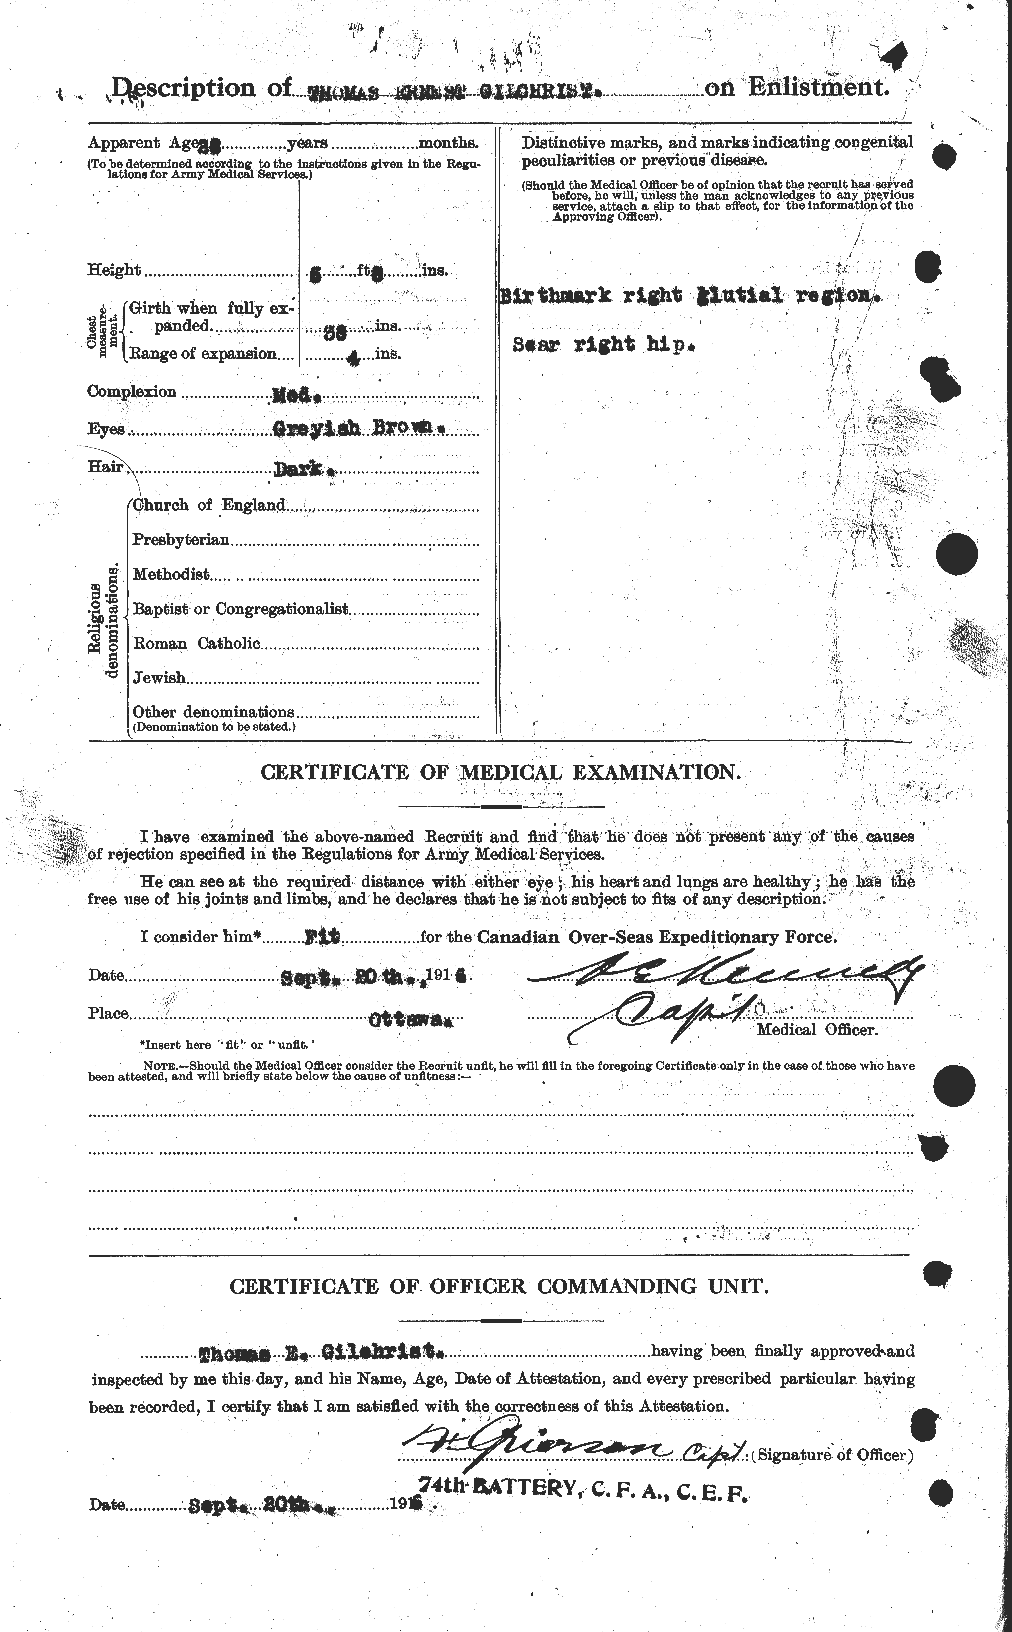 Personnel Records of the First World War - CEF 348240b